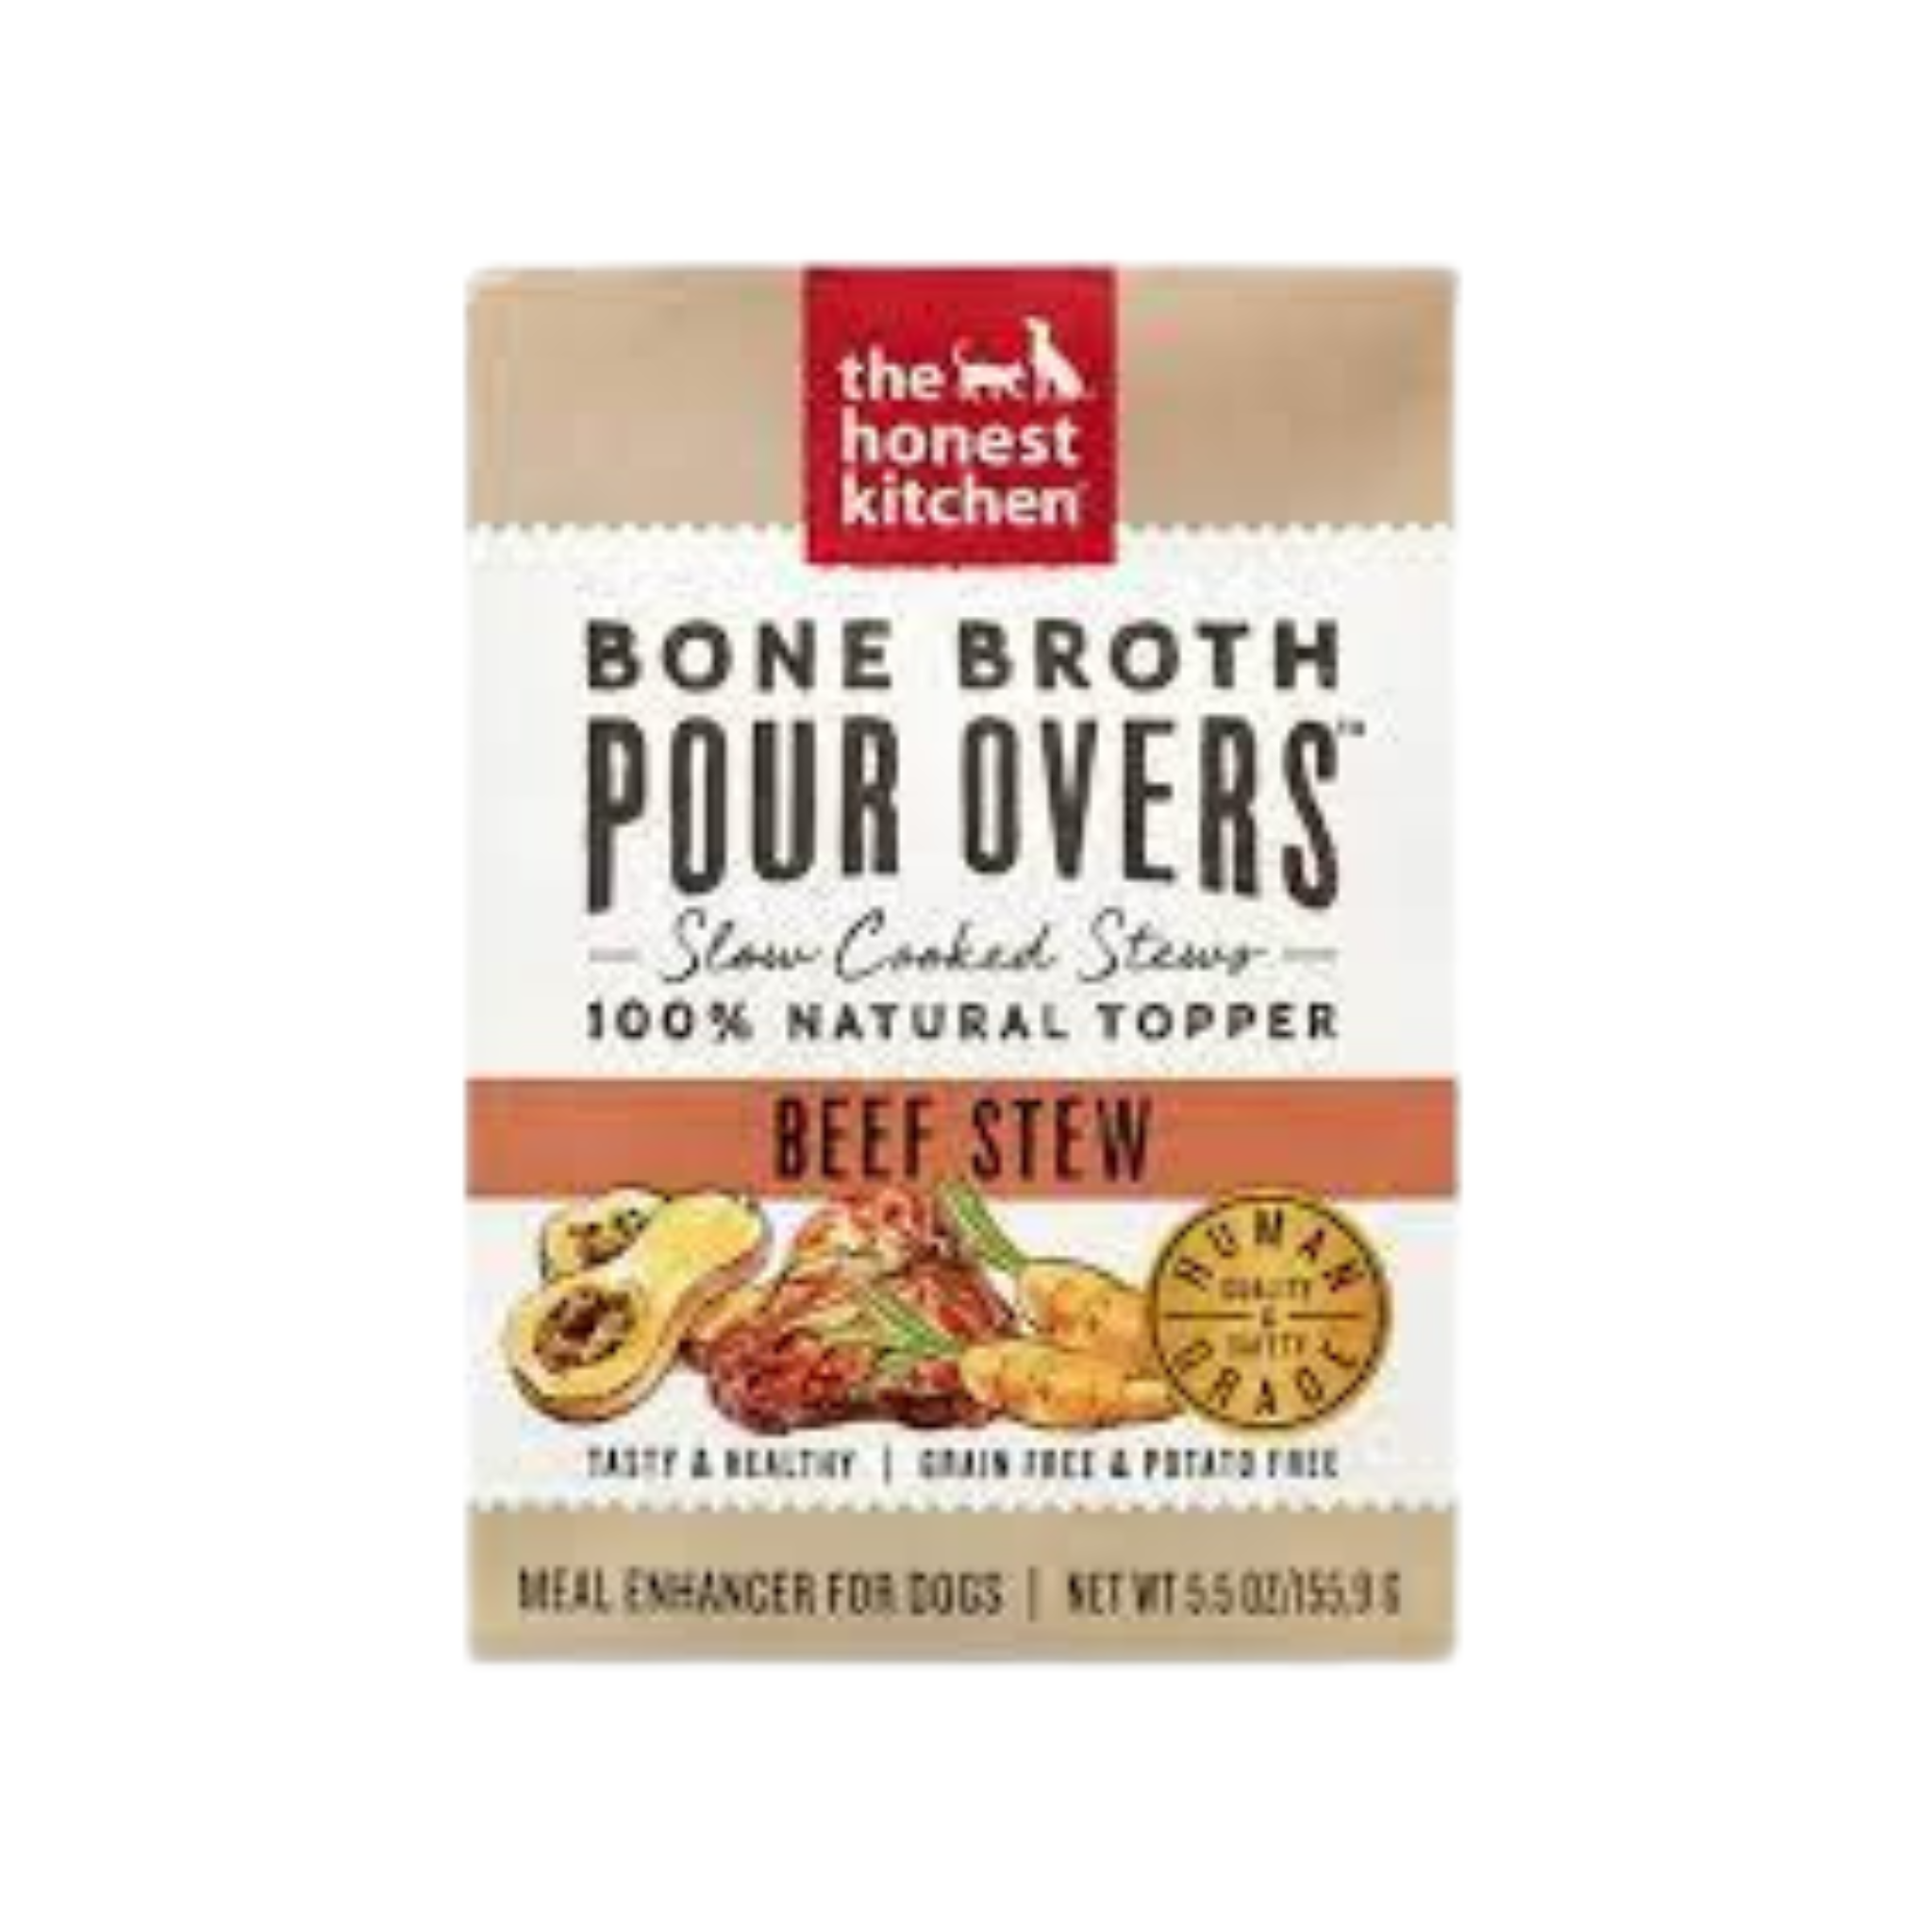 The Honest Kitchen Bone Broth Pour Overs- Beef Stew